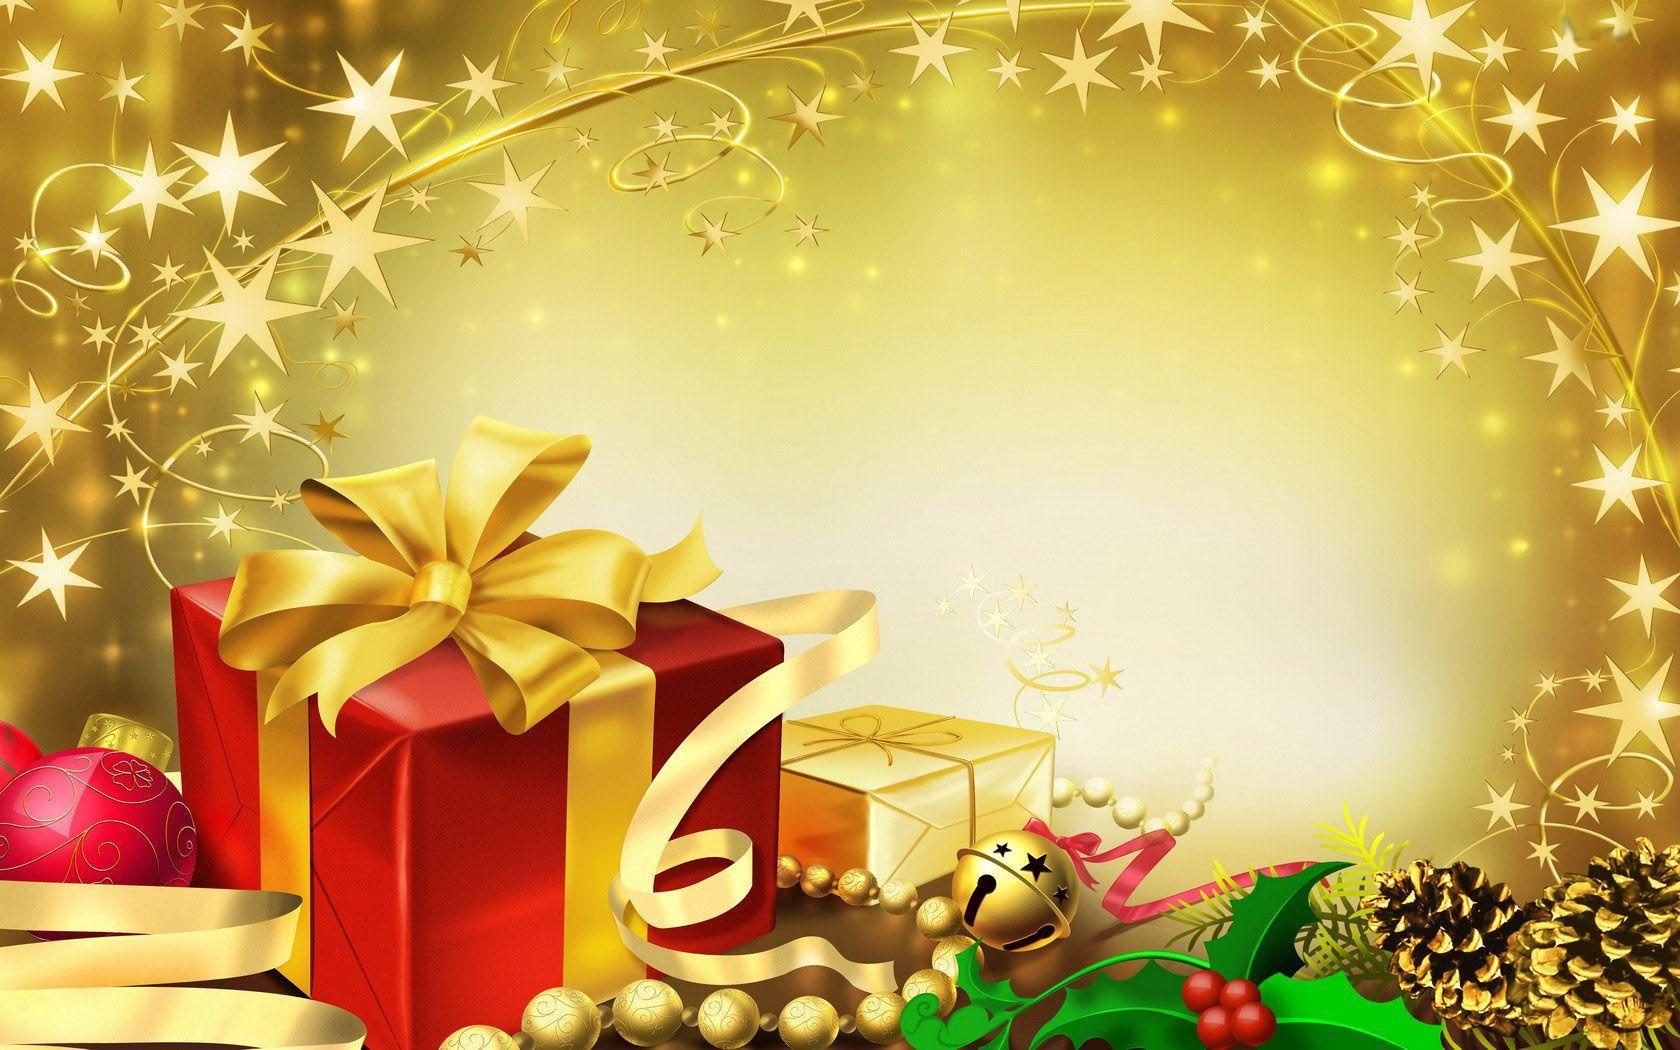 Christmas image gold x mass HD wallpaper and background photo